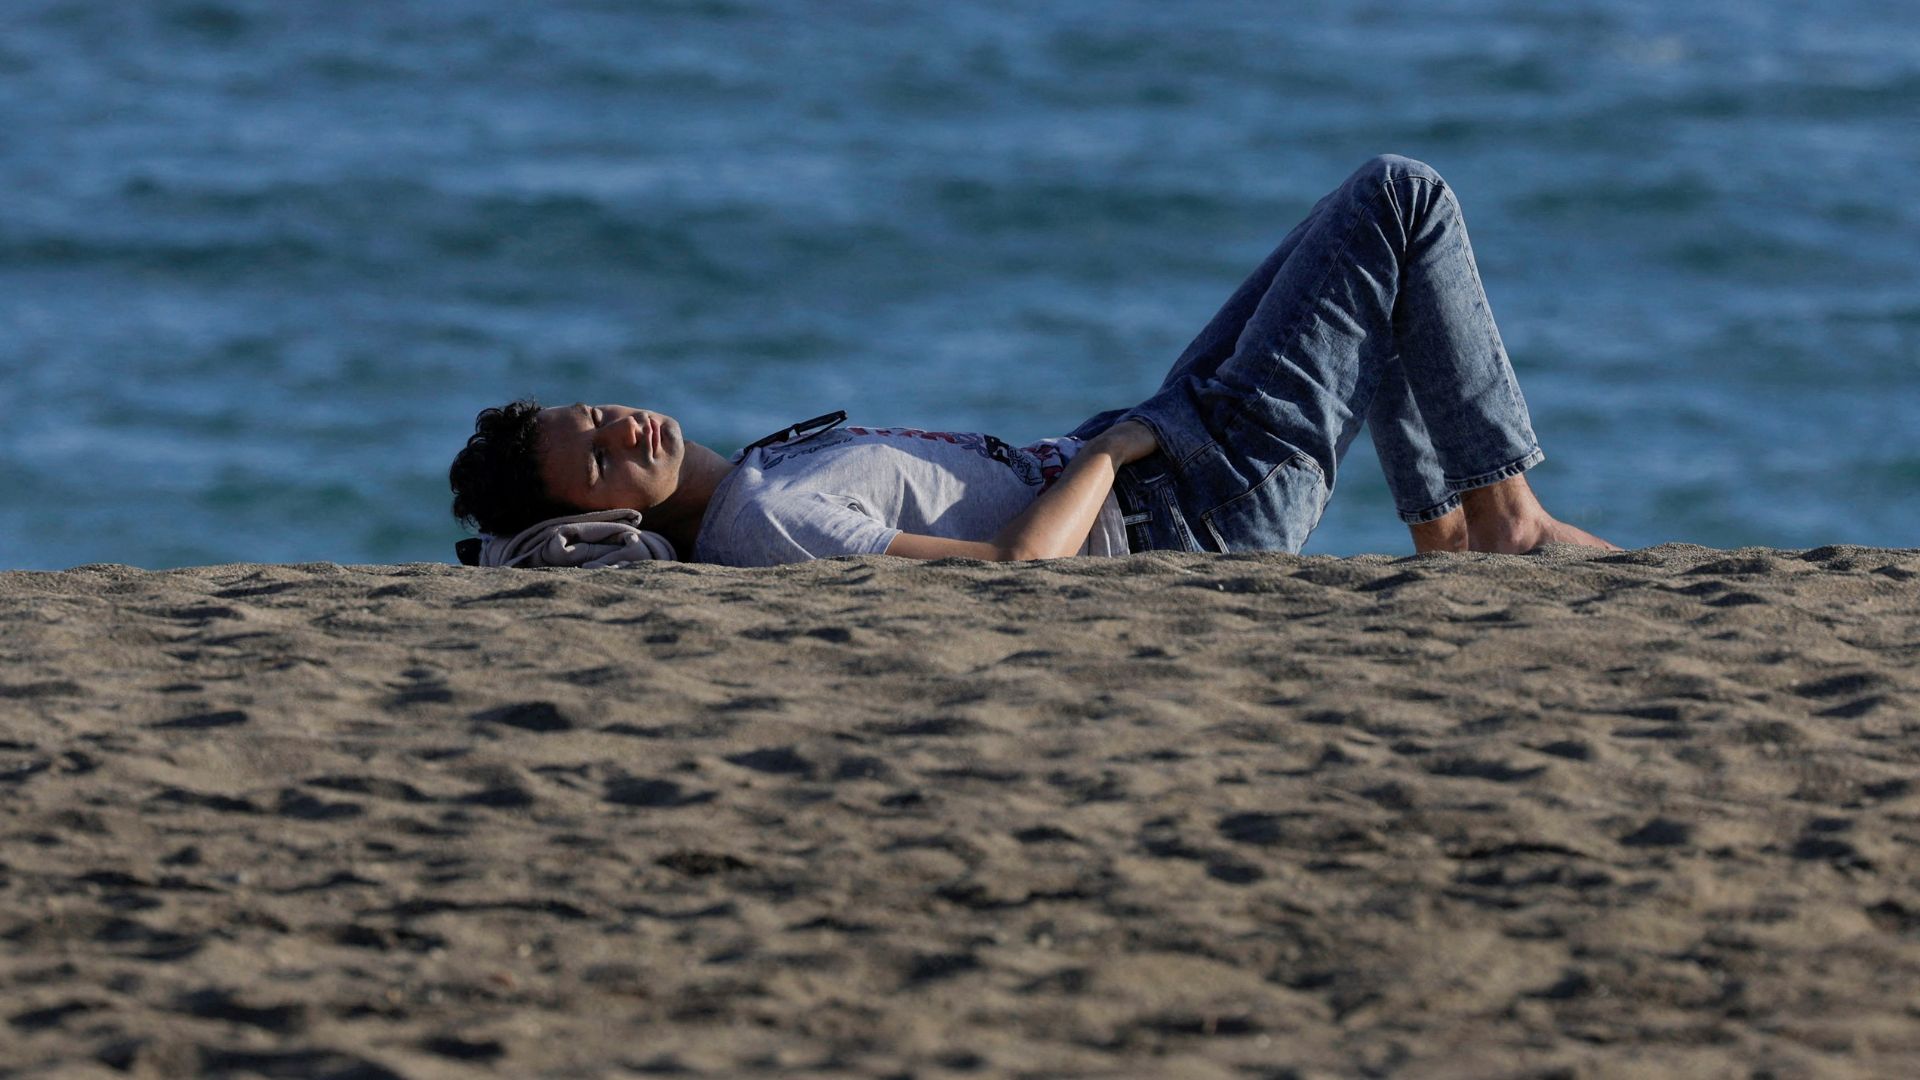 A man enjoys the sun in front of the sea during unseasonably warm temperatures in Malaga, southern Spain, on January 4. /Jon Nazca/Reuters